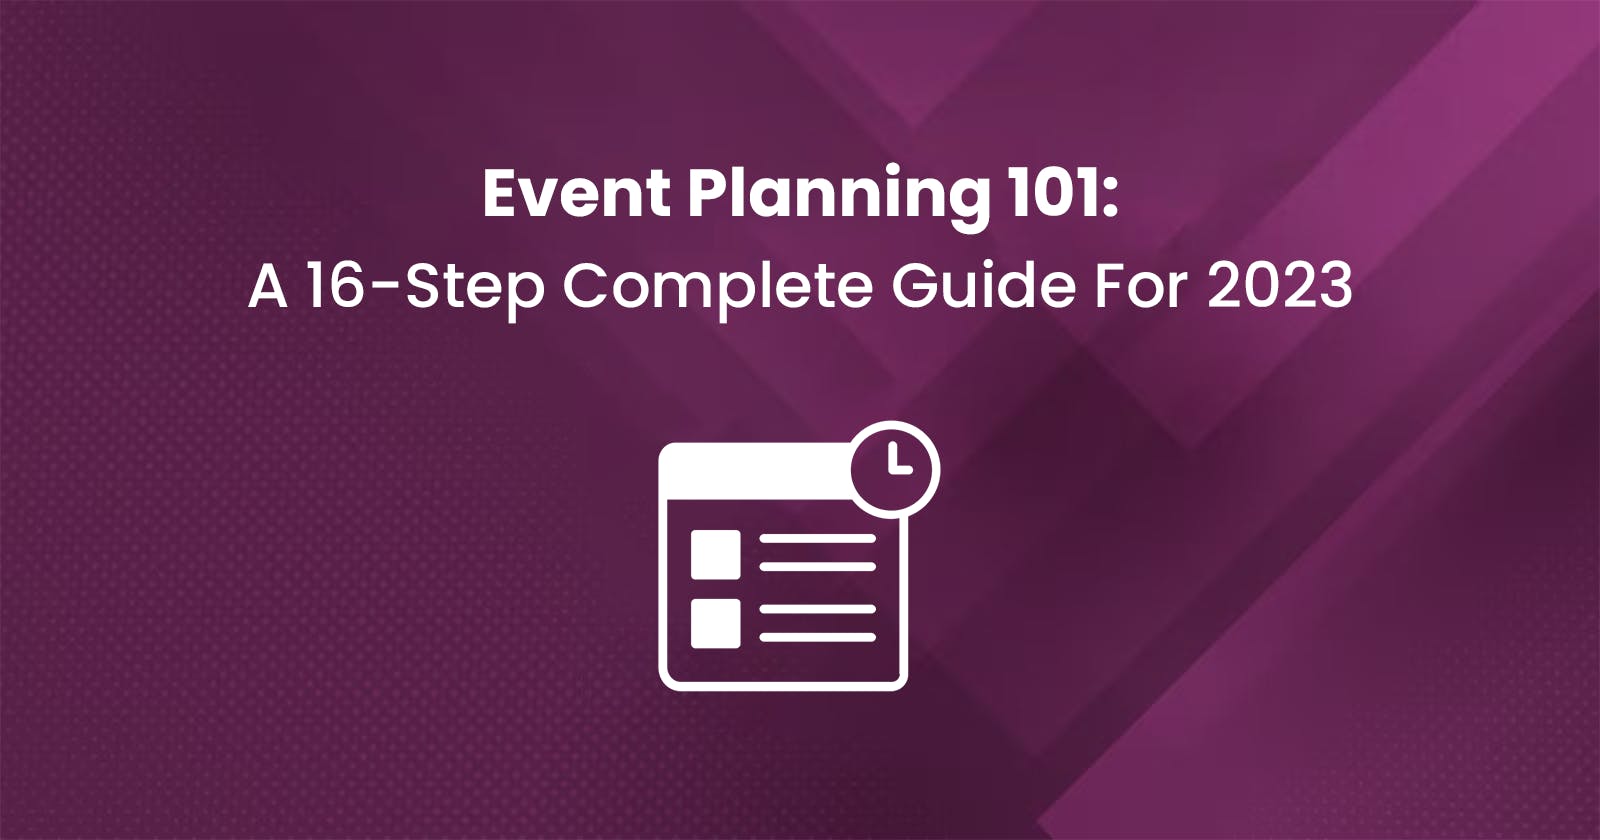 Event Planning 101: A 16-Step Complete Guide For 2023